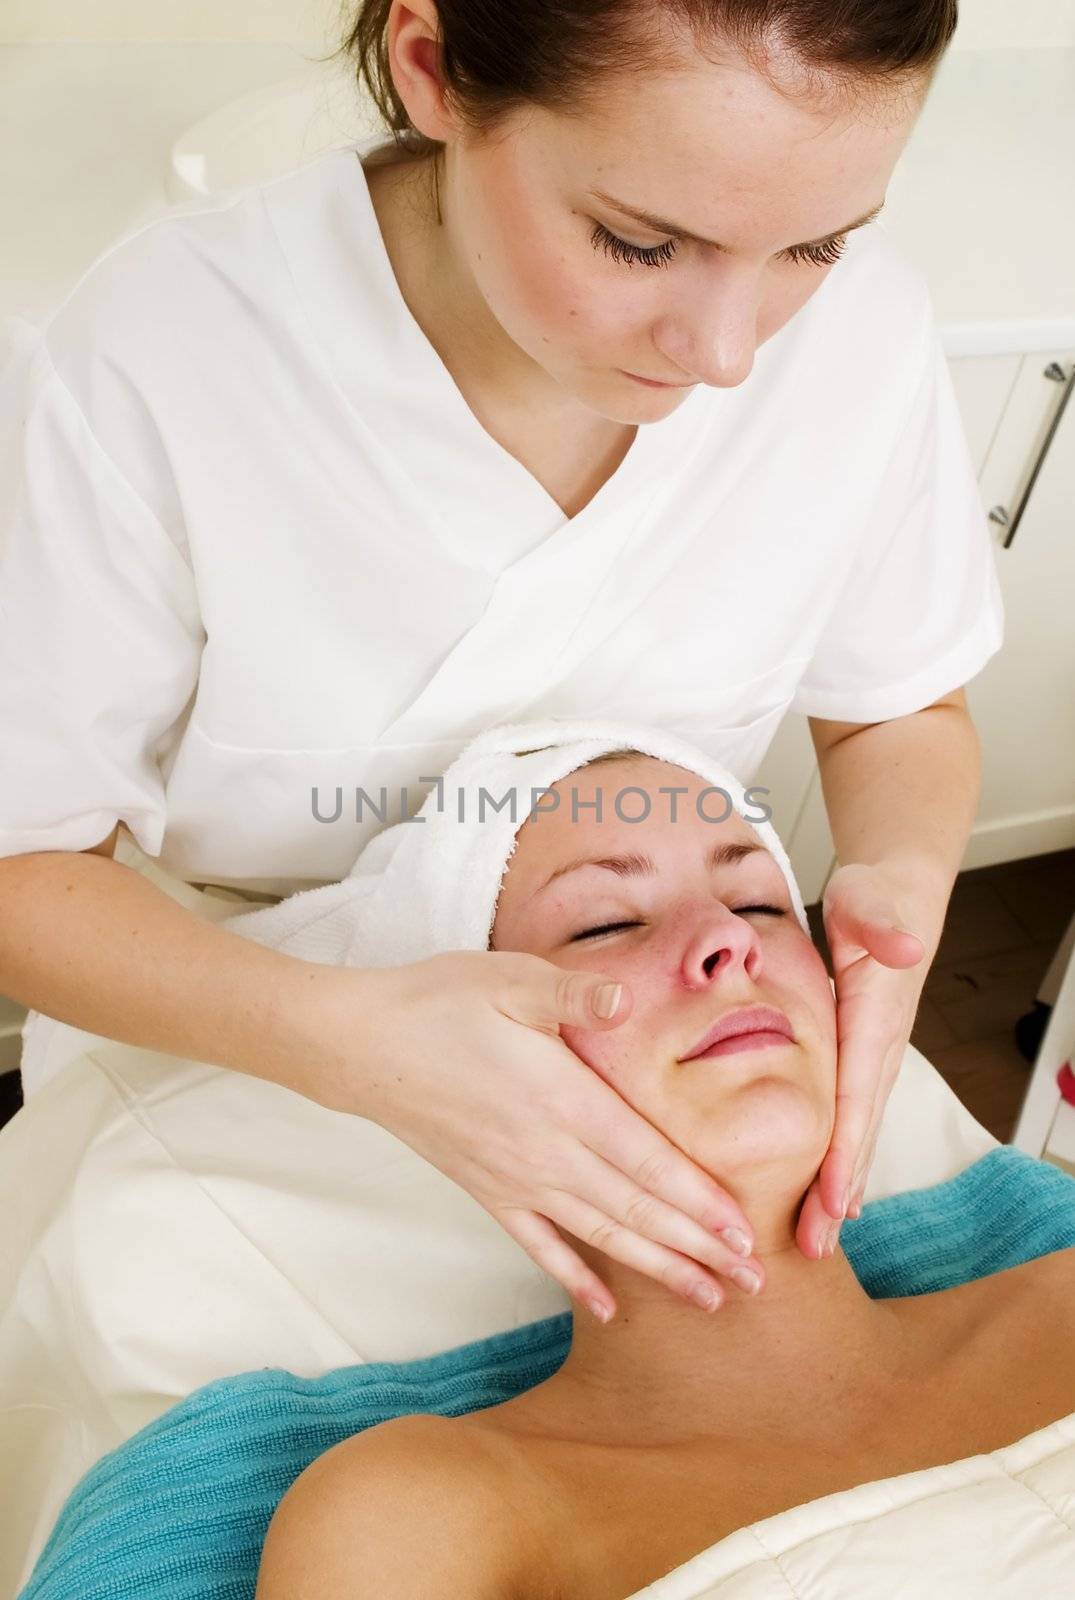 A face massage during a facial at a beauty spa.